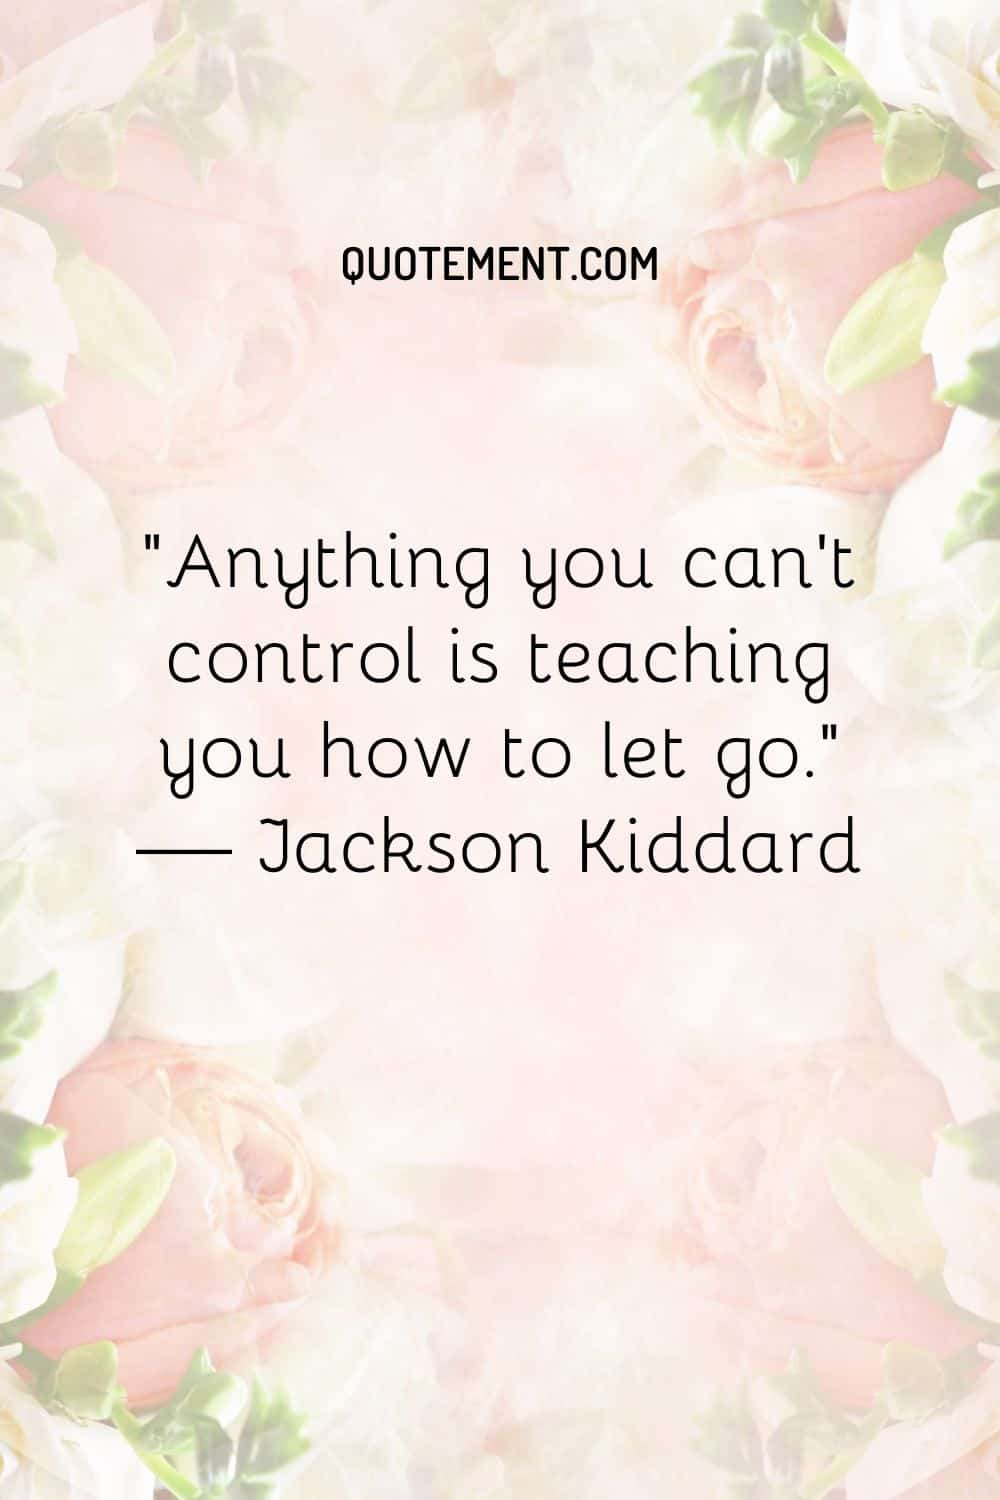 Anything you can’t control is teaching you how to let go.